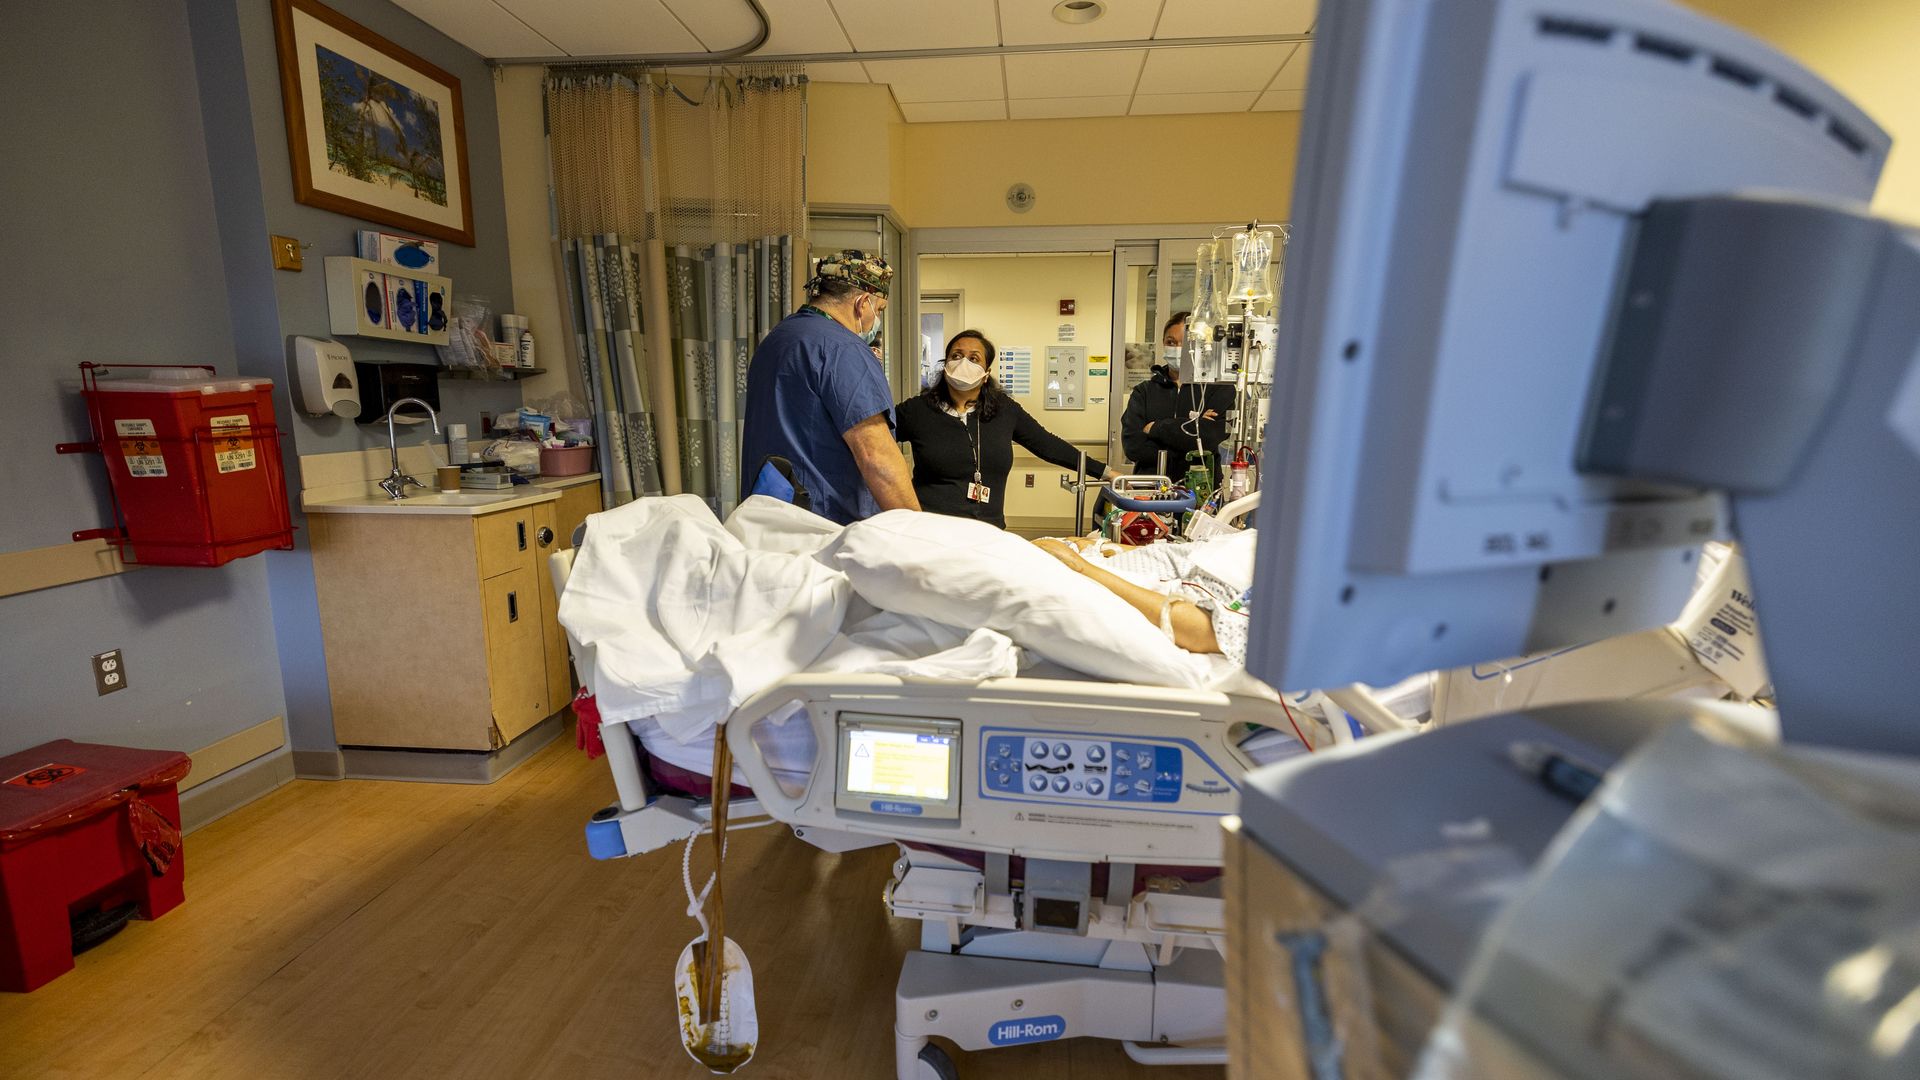 Photo of a doctor and a nurse standing next to a patient's bed at a hospital